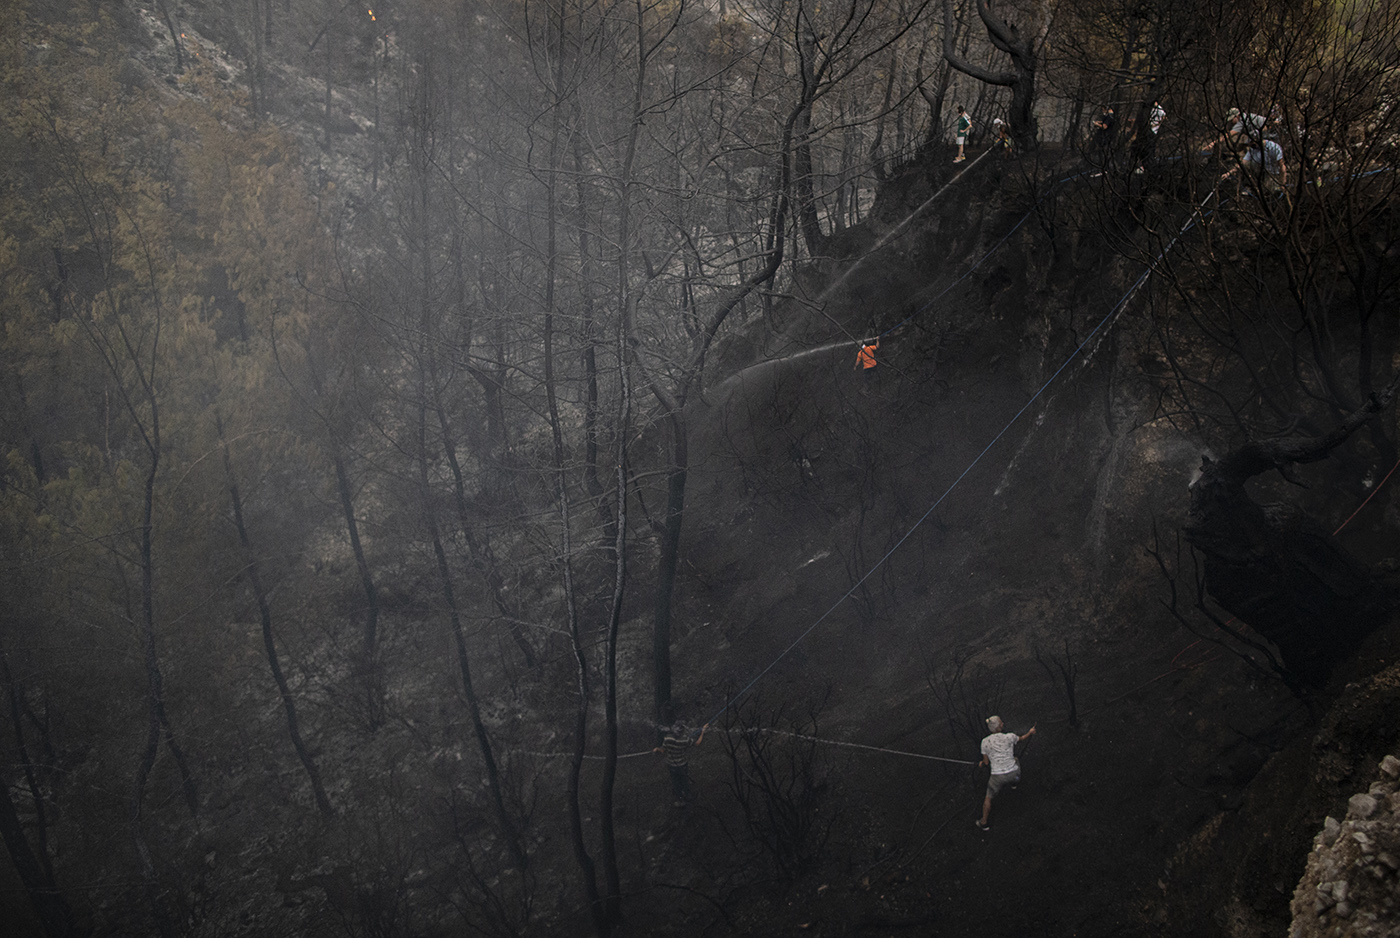 People try to put out the fire during the wildfires at the Yuvarlakcay village of the Koycegiz district of Mugla, Turkey, 03 August 2021. Turkish Health minister Fahrettin Koca confirmed that eight people have lost their lives due to the wildfires raging in Turkey’s Mediterranean towns.